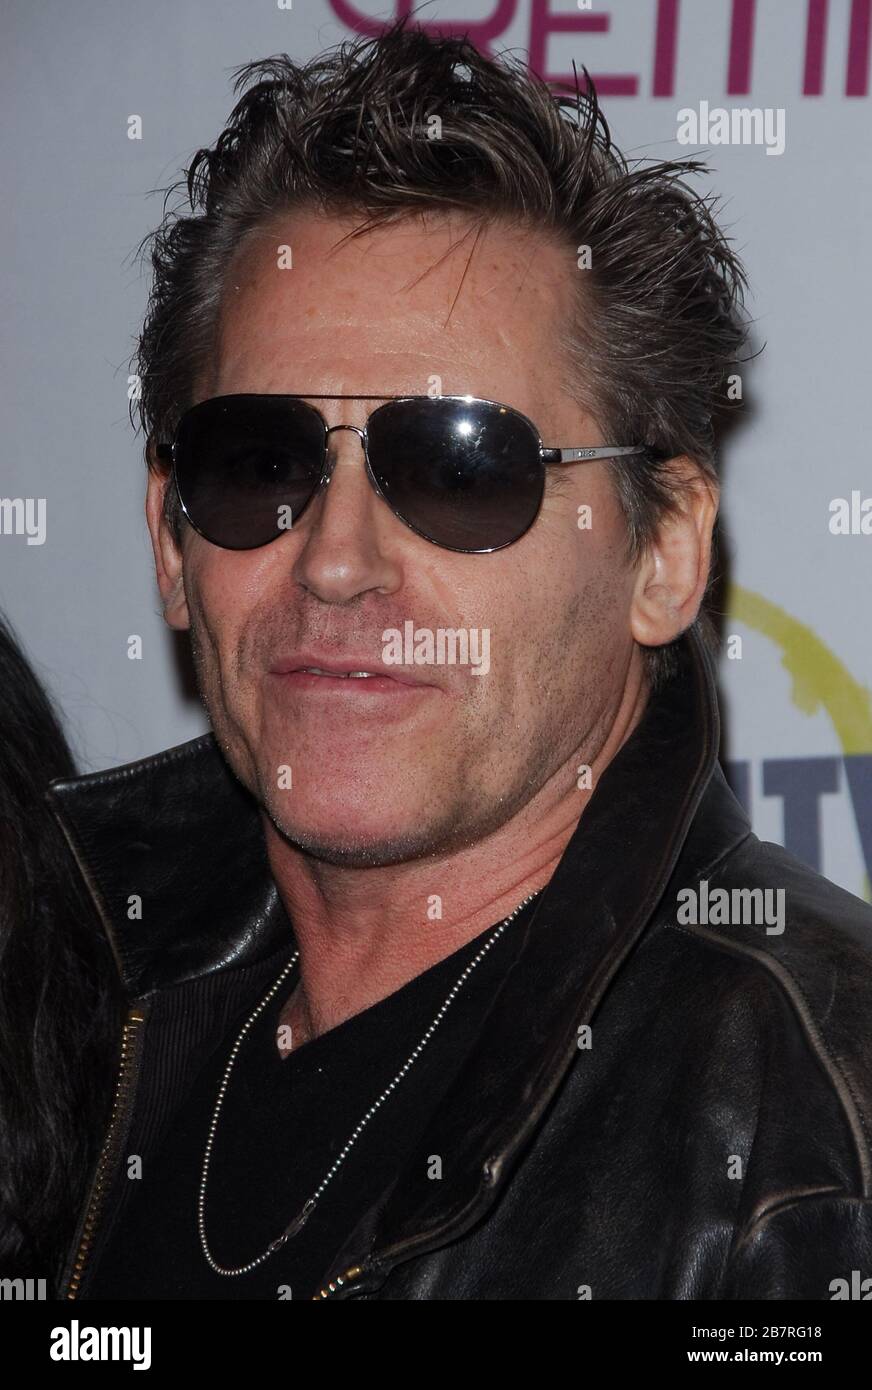 Jeff Conaway at The Reality Remix Really Awards held at Les Deux in Hollywood, CA. The event took place on Tuesday, October 24, 2006.  Photo by: SBM / PictureLux - File Reference # 33984-7667SBMPLX Stock Photo